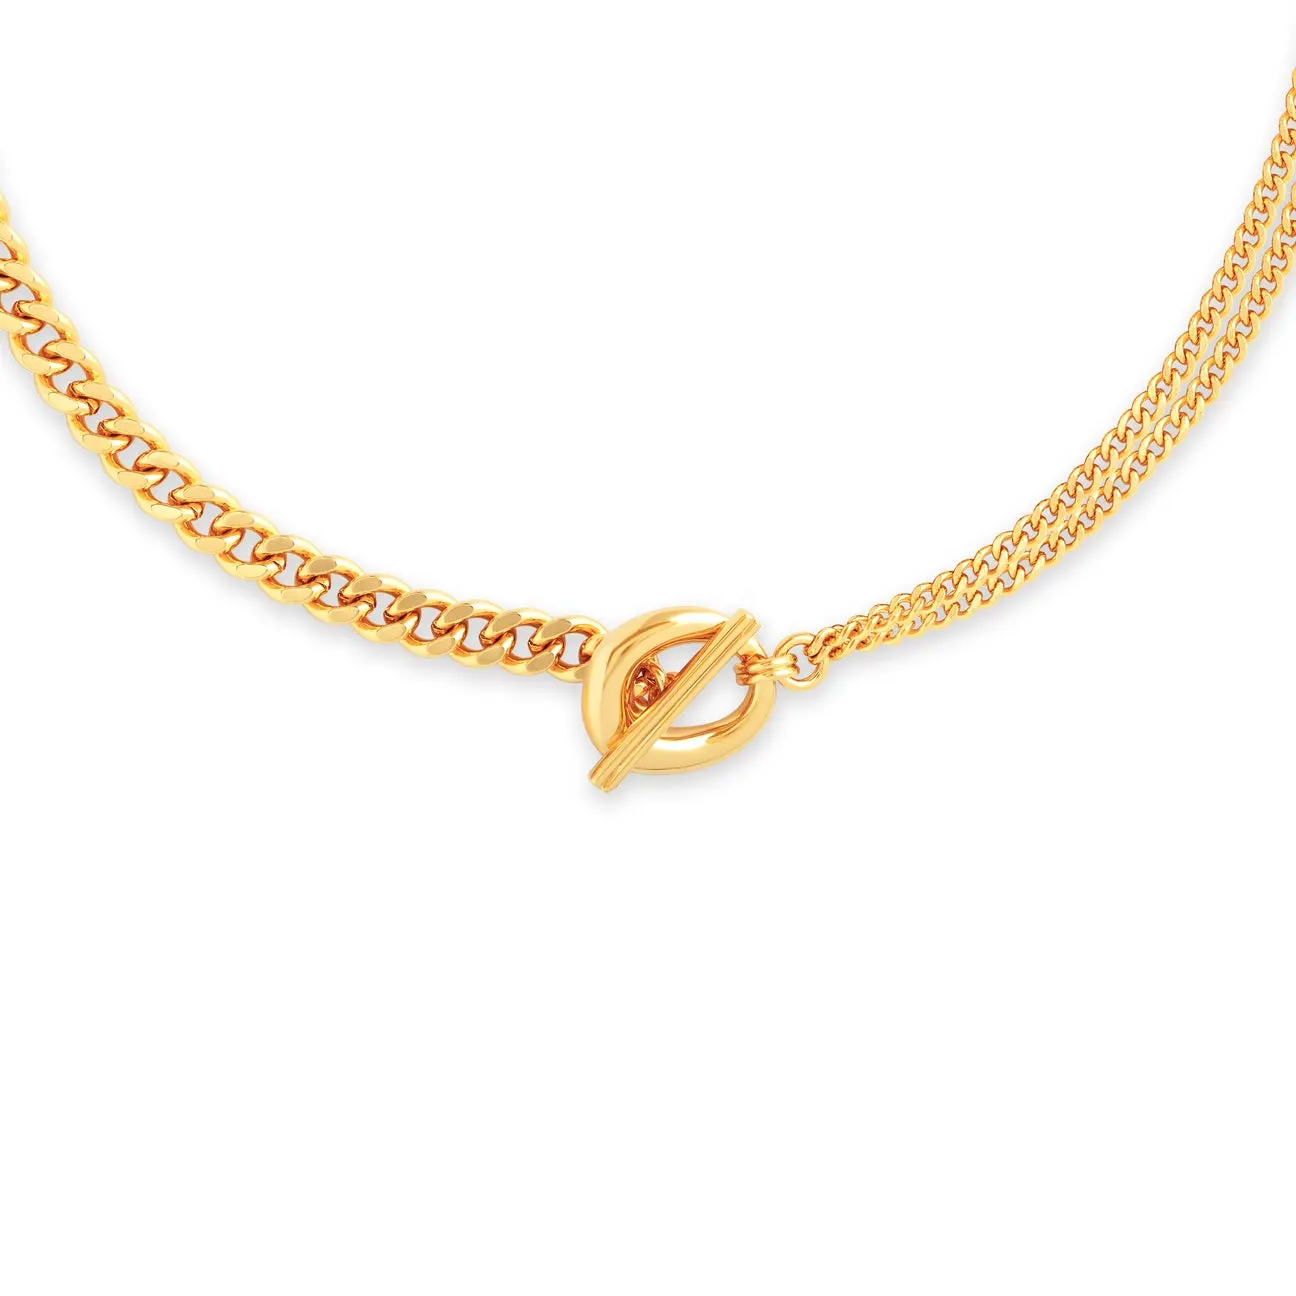 Gemnel multi layer chunky curb chain with dainty T-bar pendant necklace